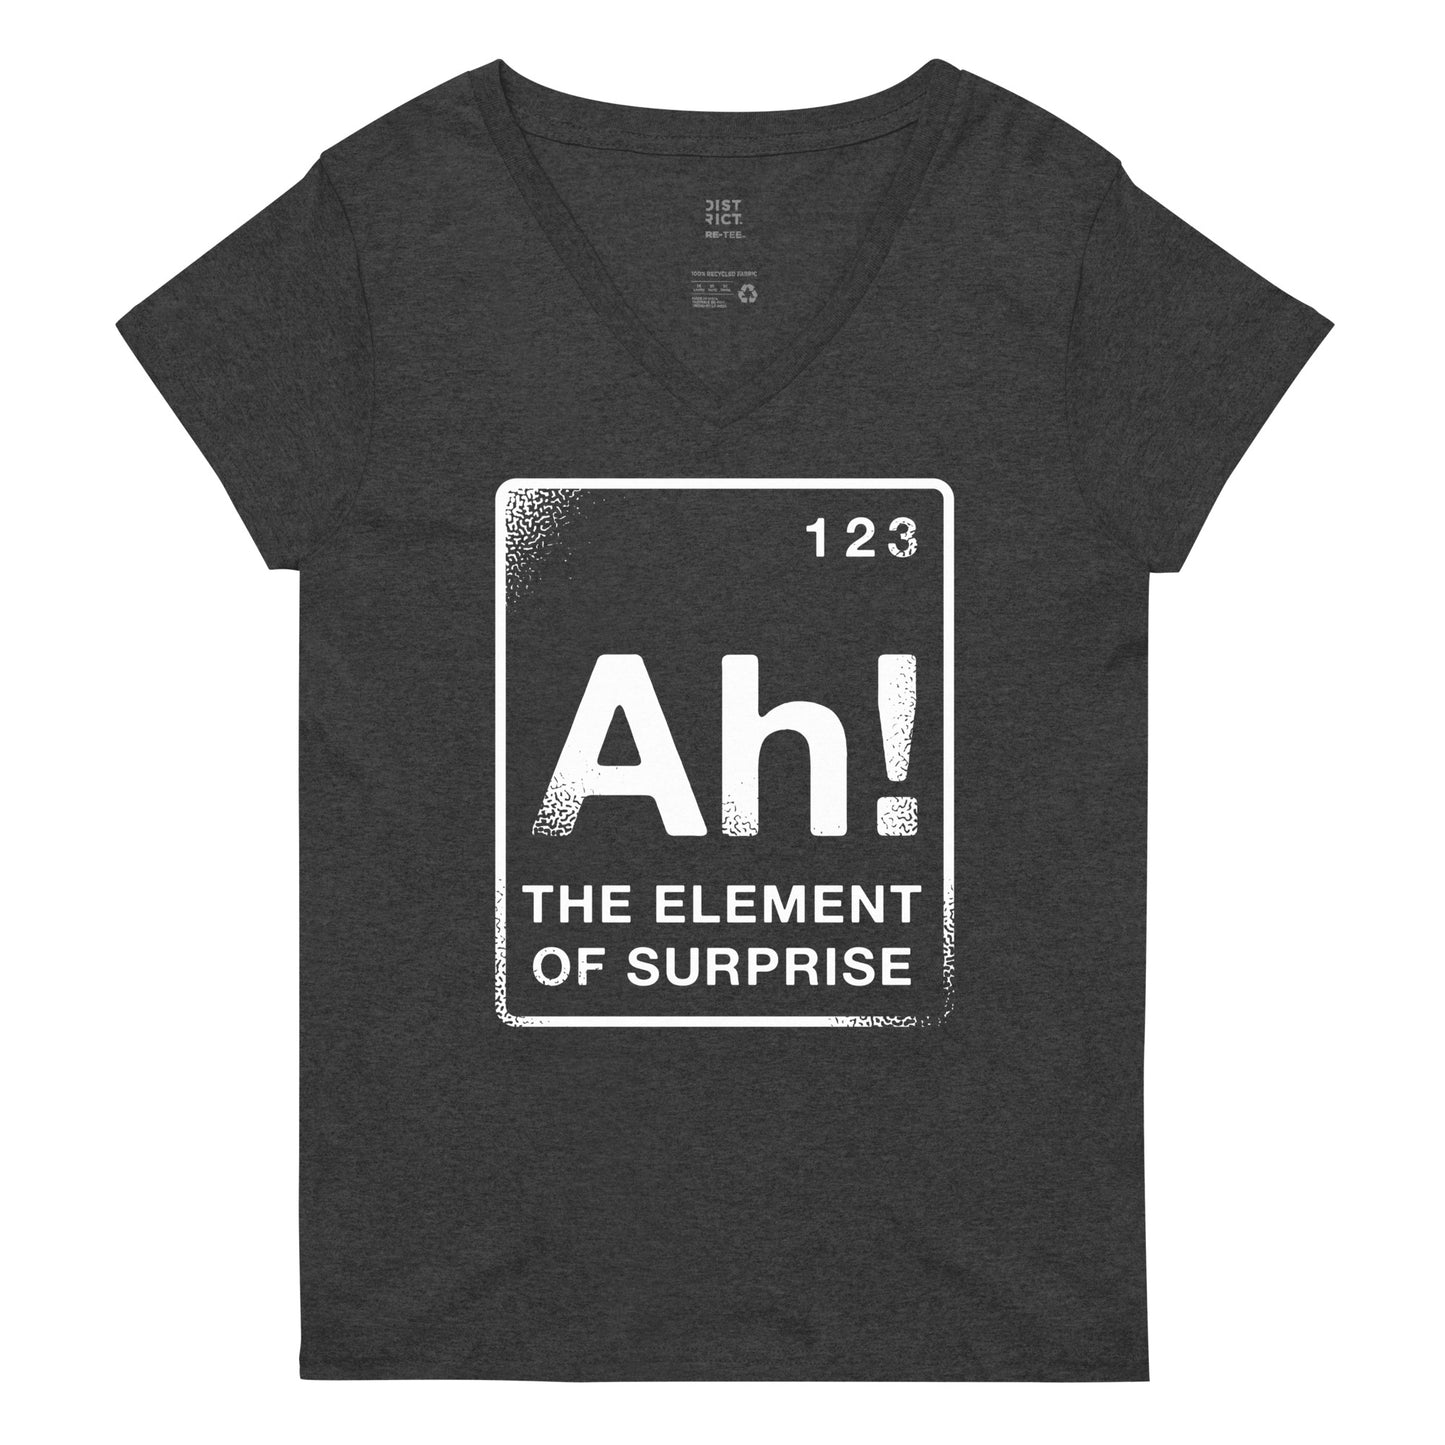 The Element Of Surprise Women's V-Neck Tee